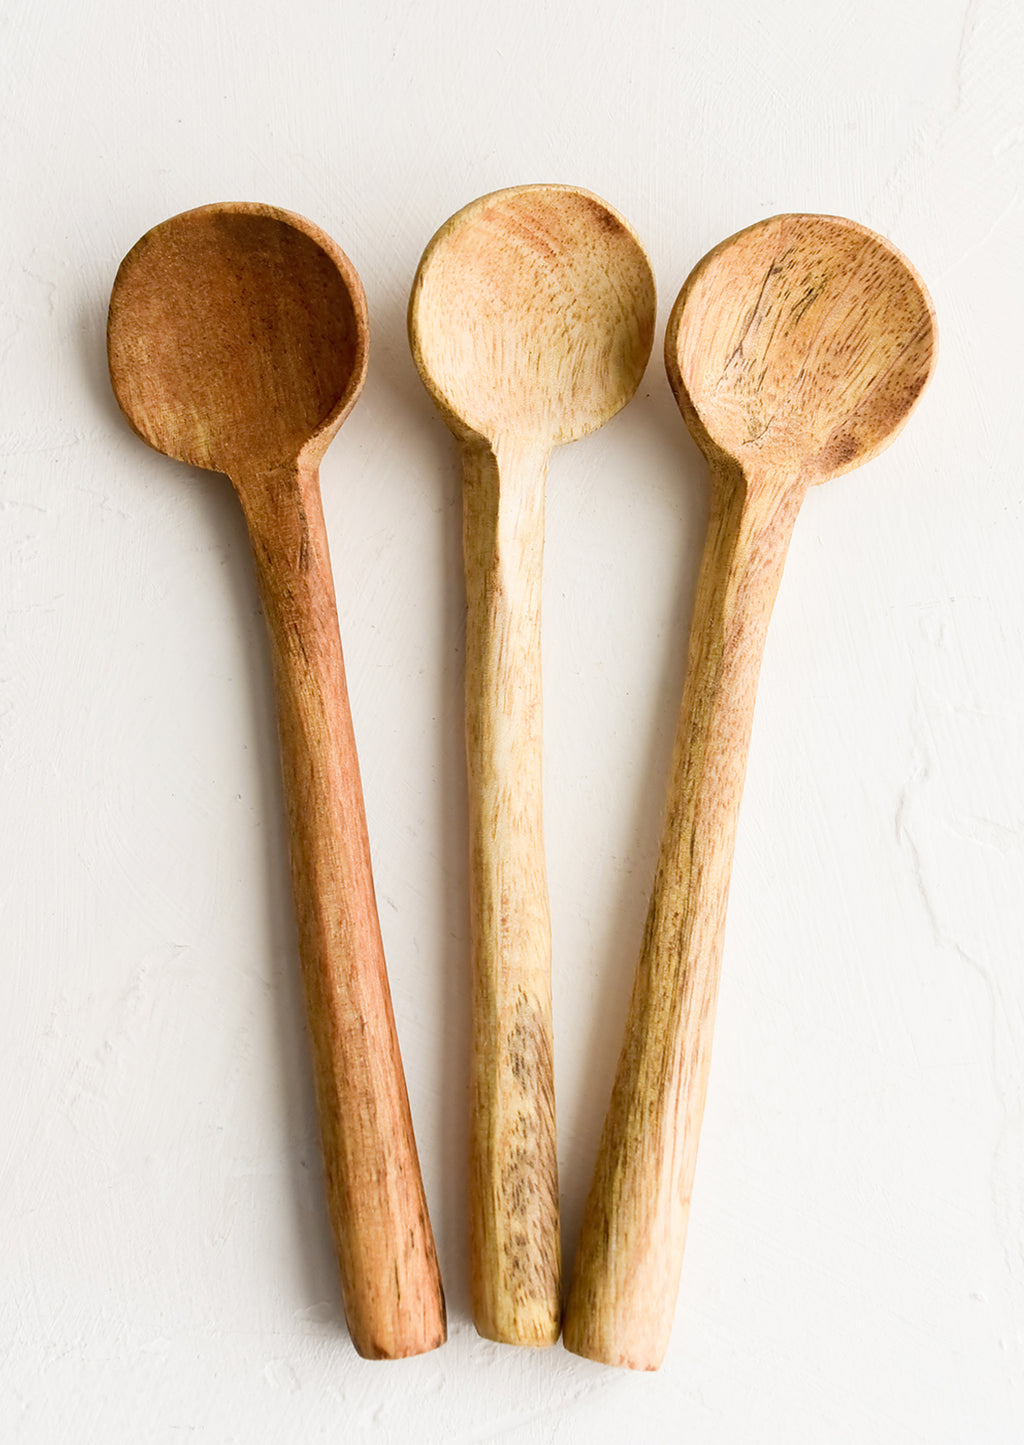 2: Three carved wooden teaspoons in slightly different wood colors.